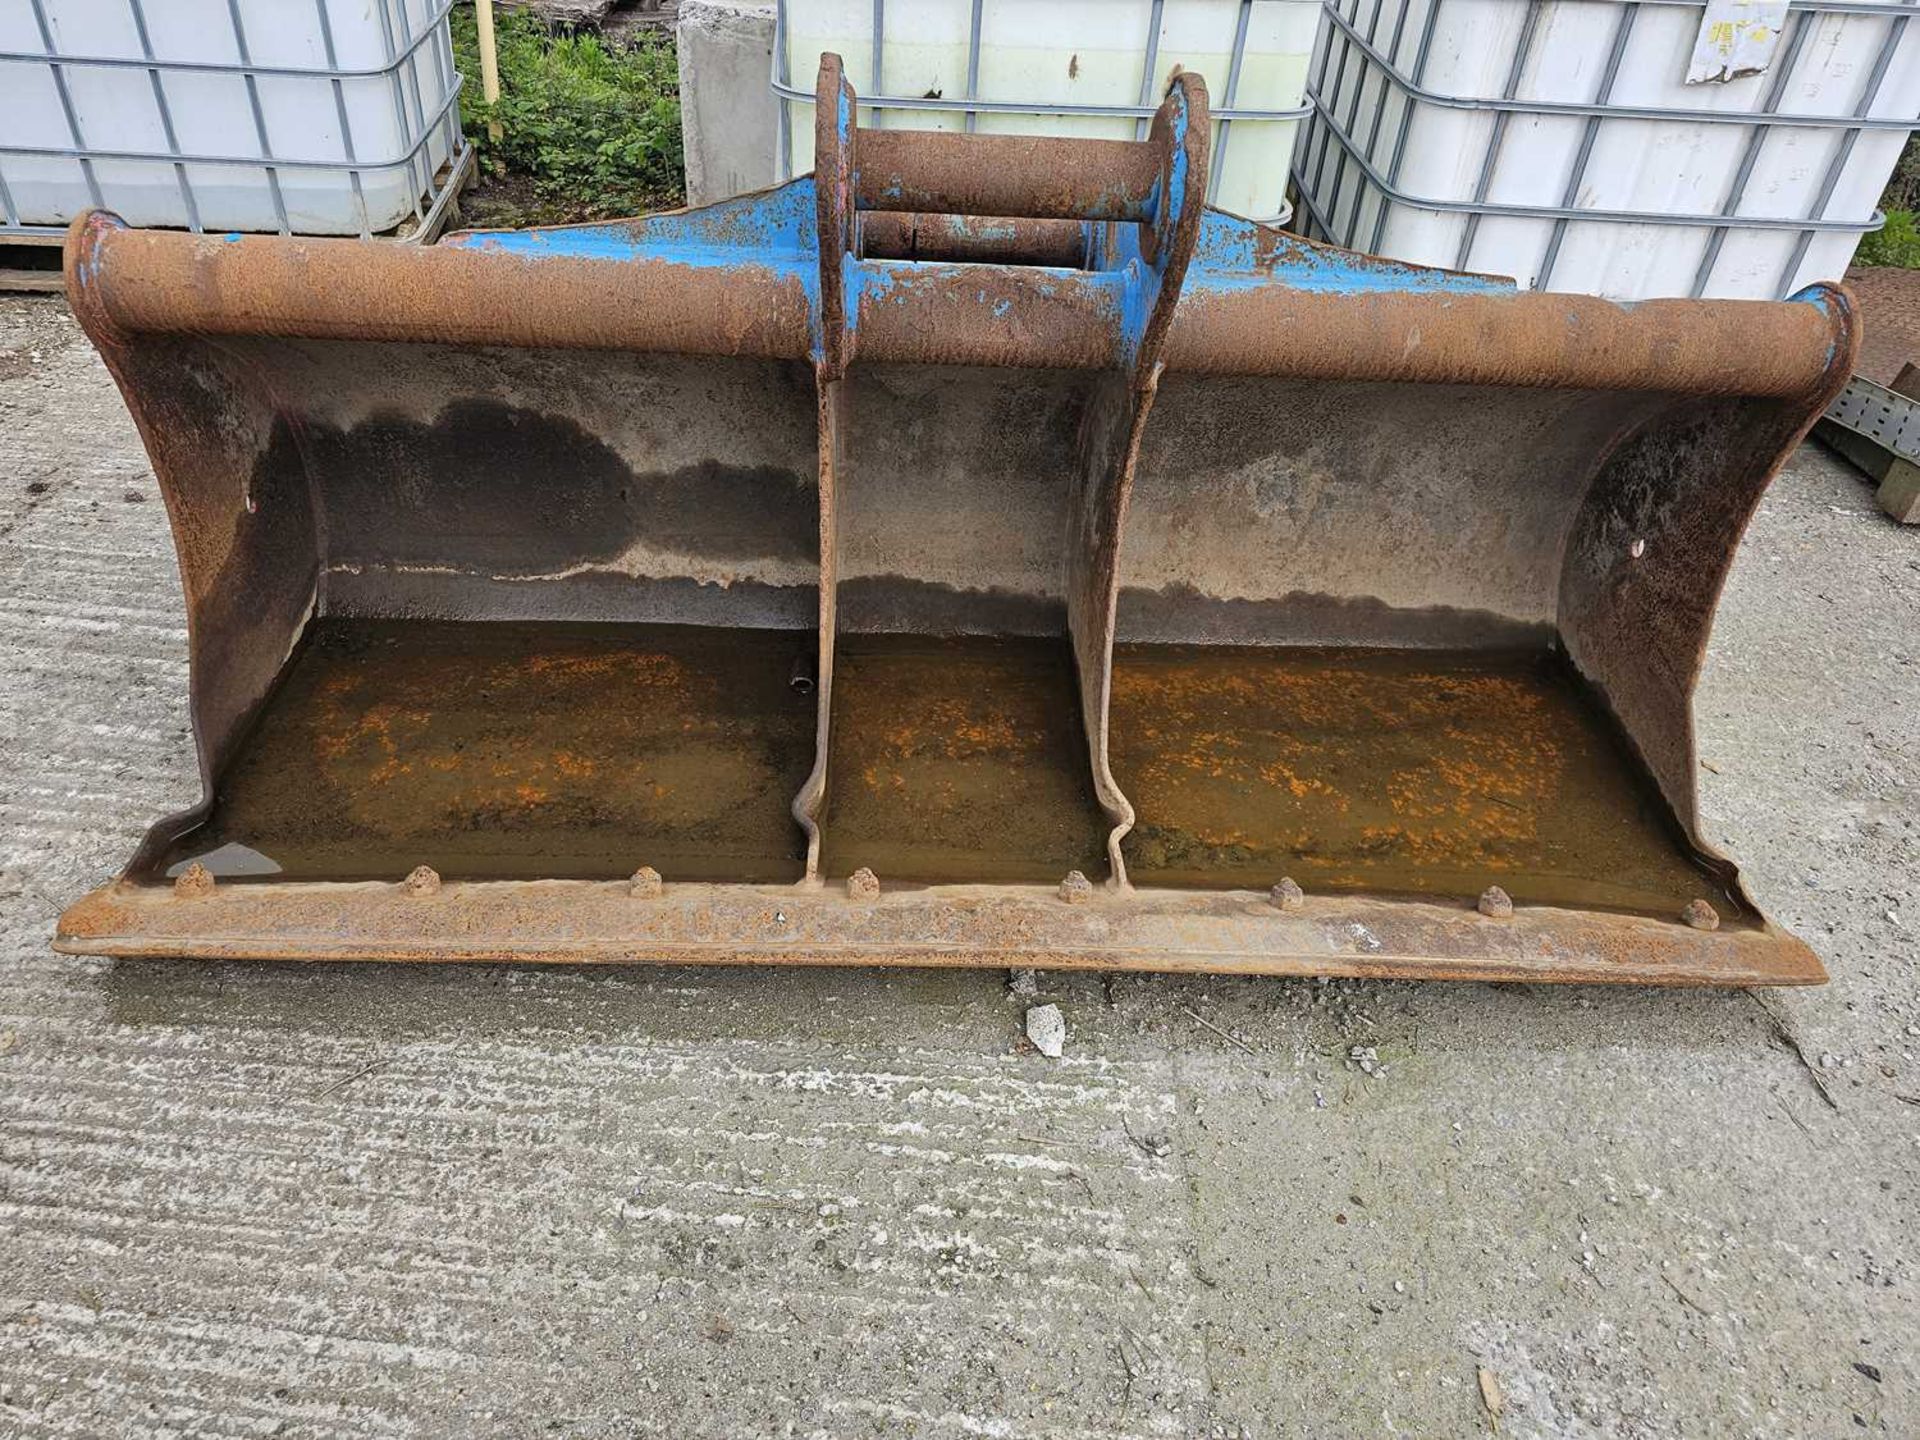 84" Grading Bucket 80mm Pin to suit 20 Ton Excavator - Image 5 of 6